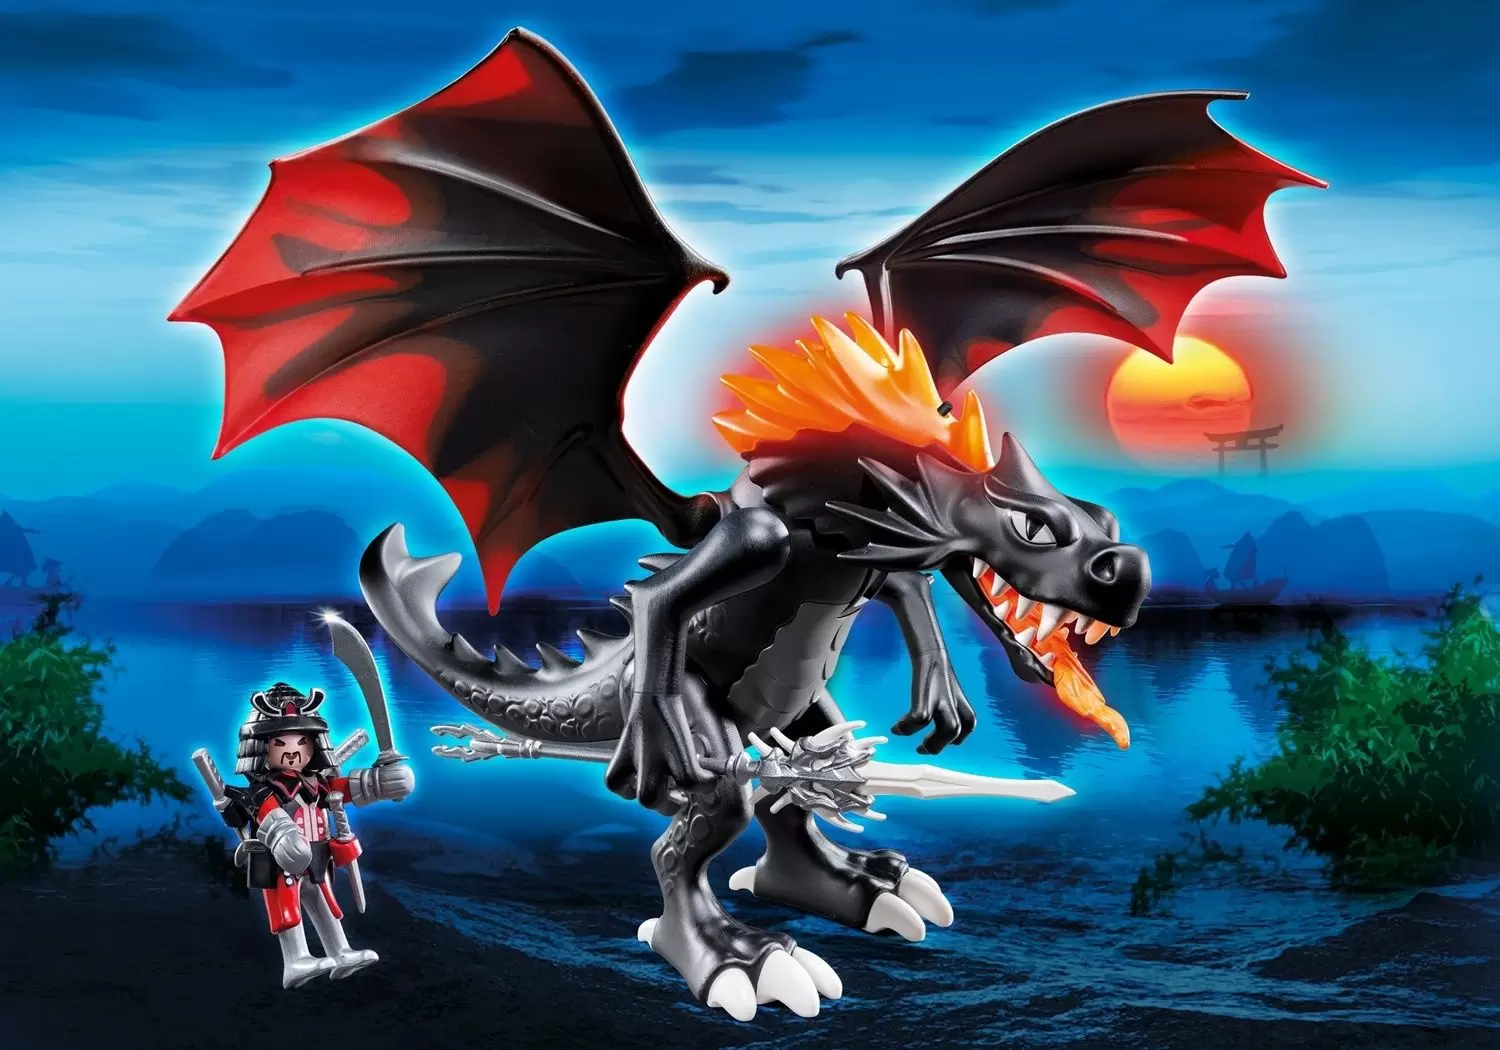 Playmobil Middle-Ages - Giant Battle Dragon with LED Fire